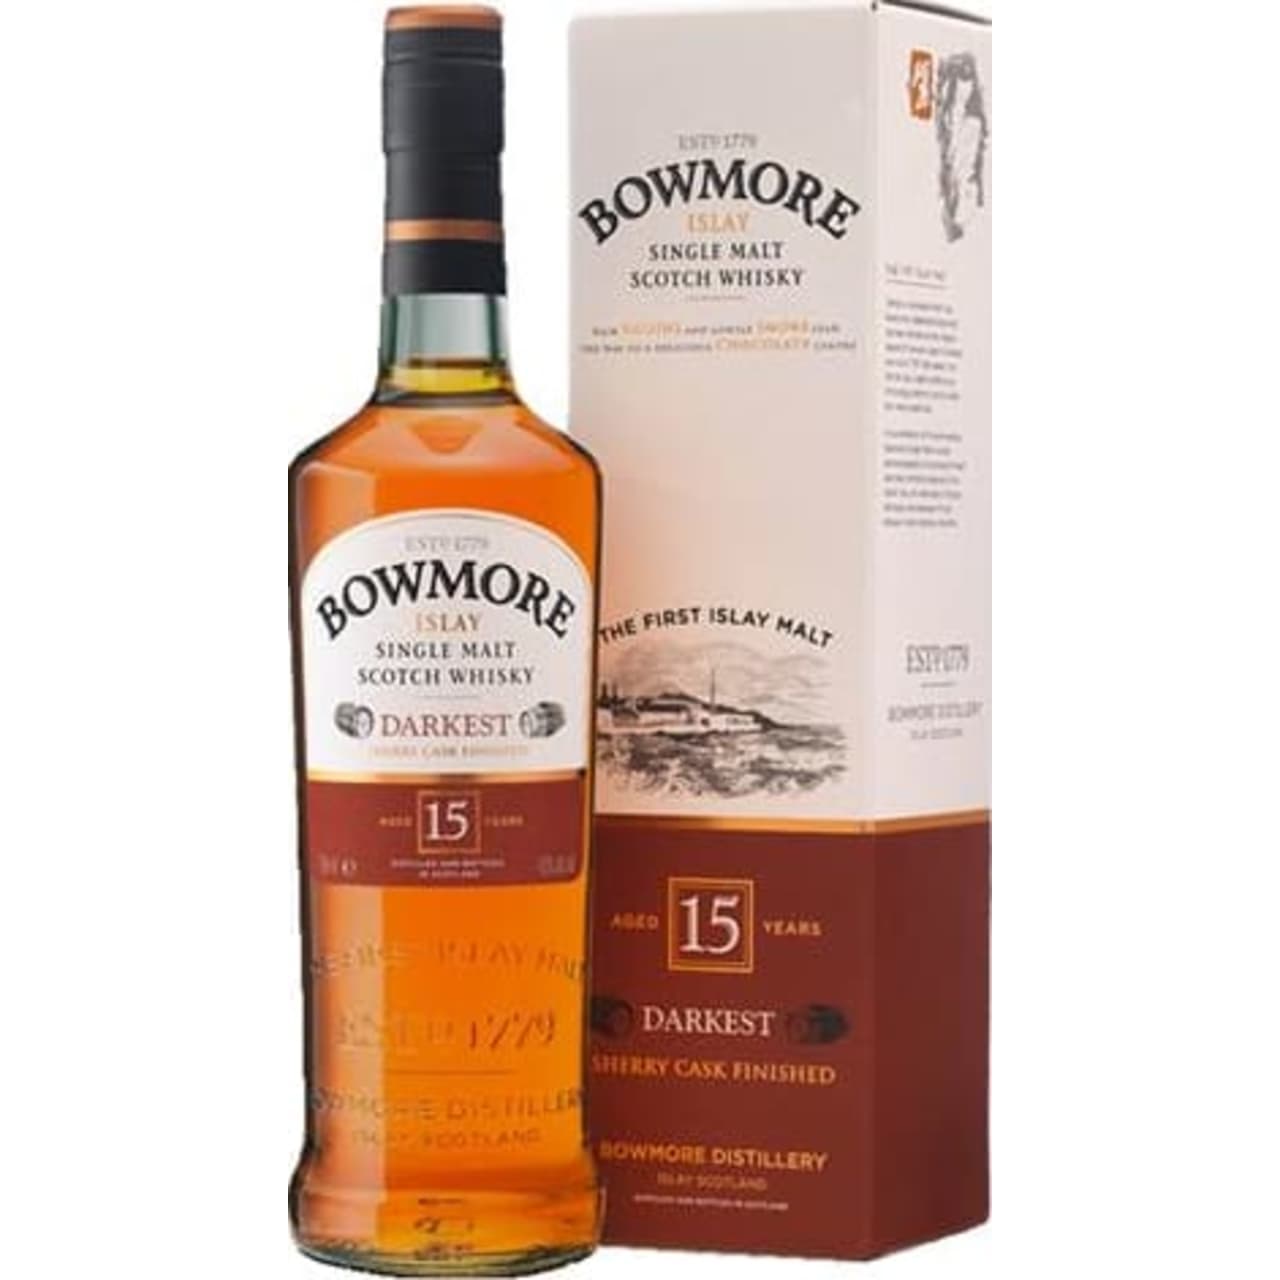 Product Image - Bowmore 15 Year Old Single Malt